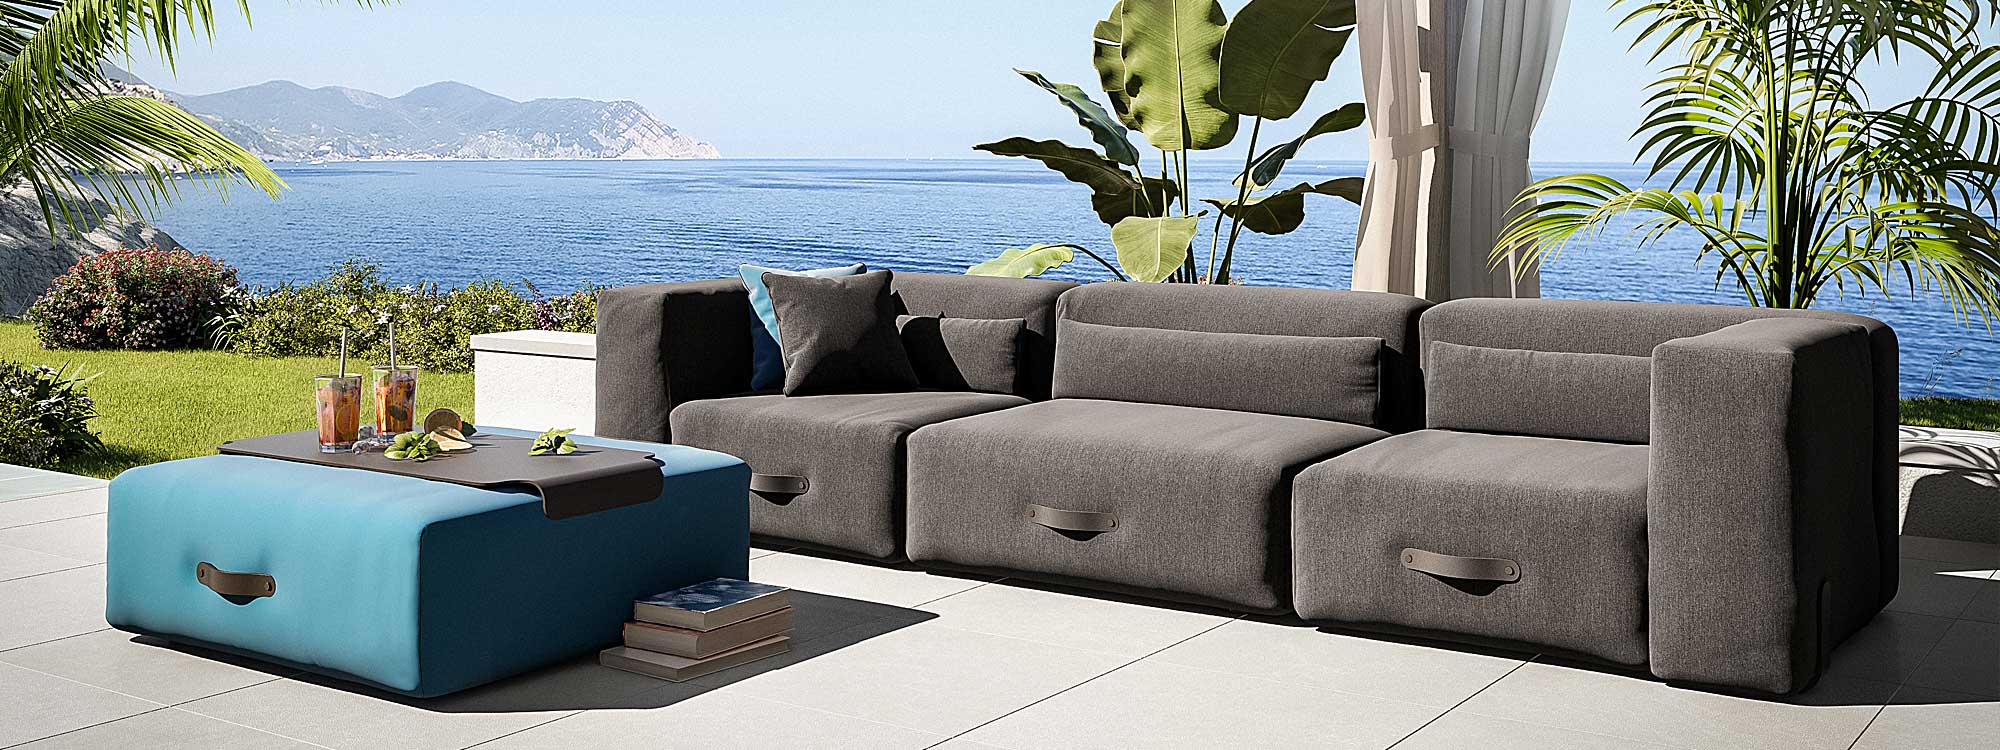 Image of anthracite Grey Miami outdoor sofa with inviting sea in background